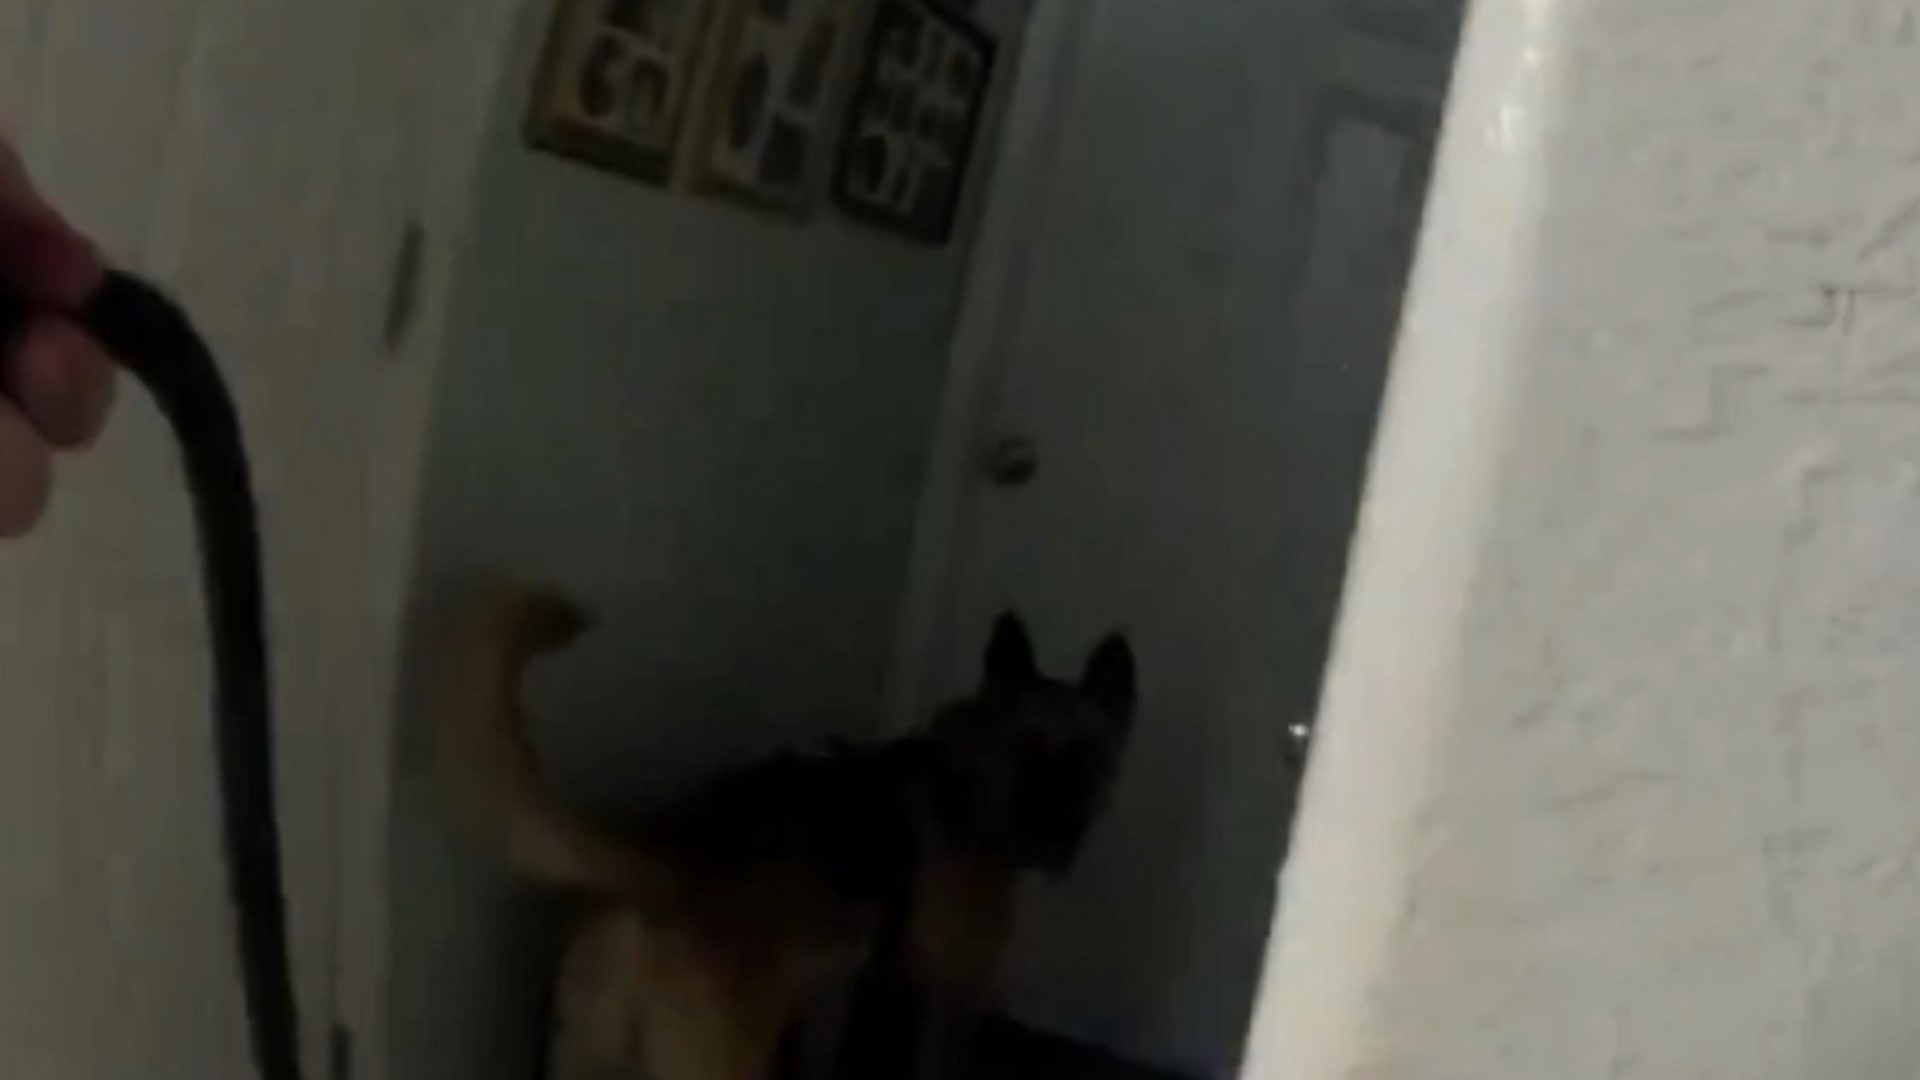 Body camera footage shows the K-9 tracking down the suspect behind a hidden door.